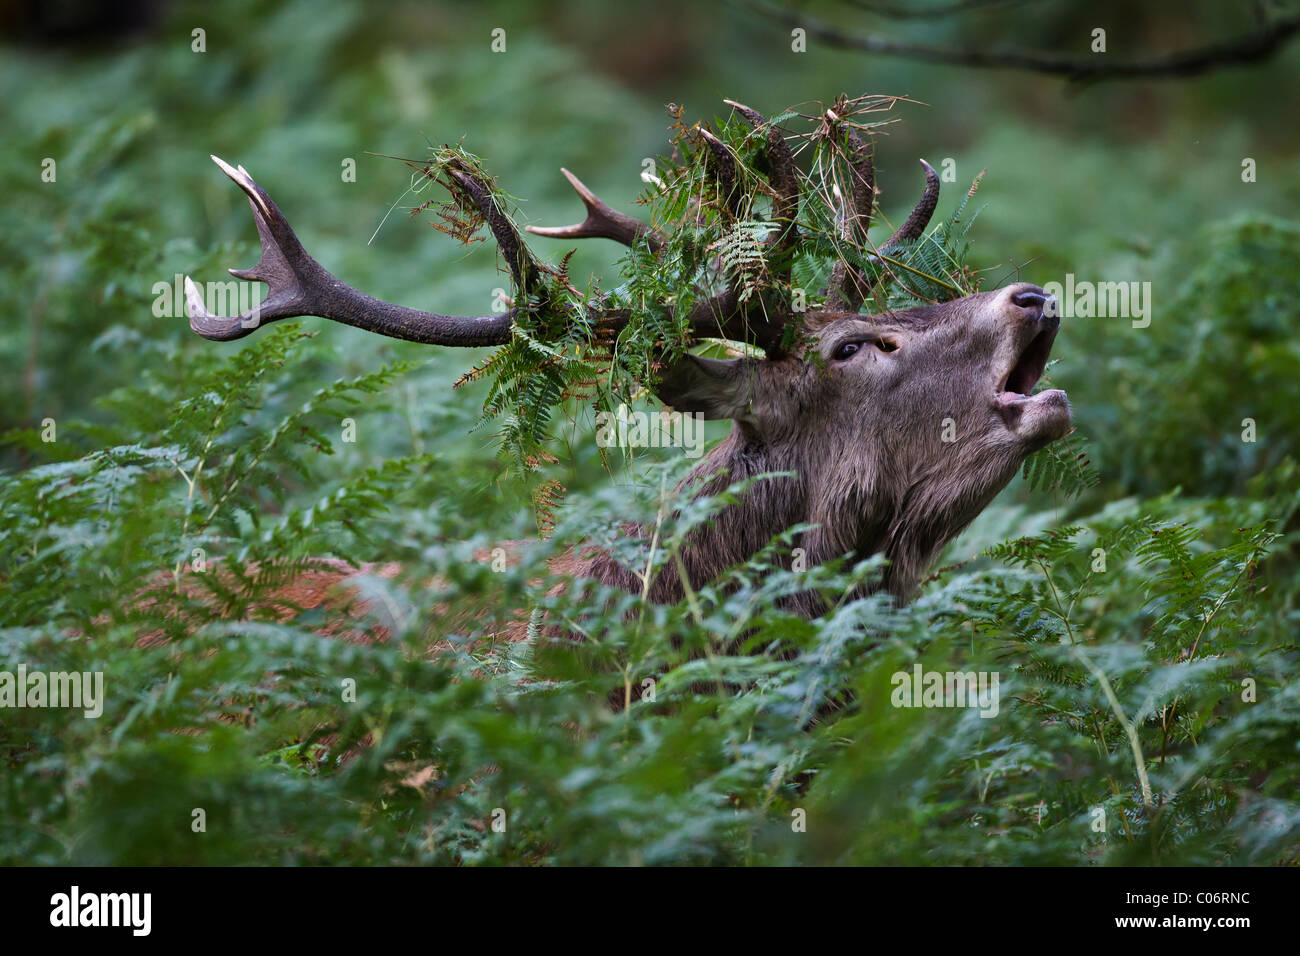 wild; wildlife;wilderness;nature;natural;green;environment;environmental;habitat; wild and free;Red deer stag preparing for a rut Stock Photo